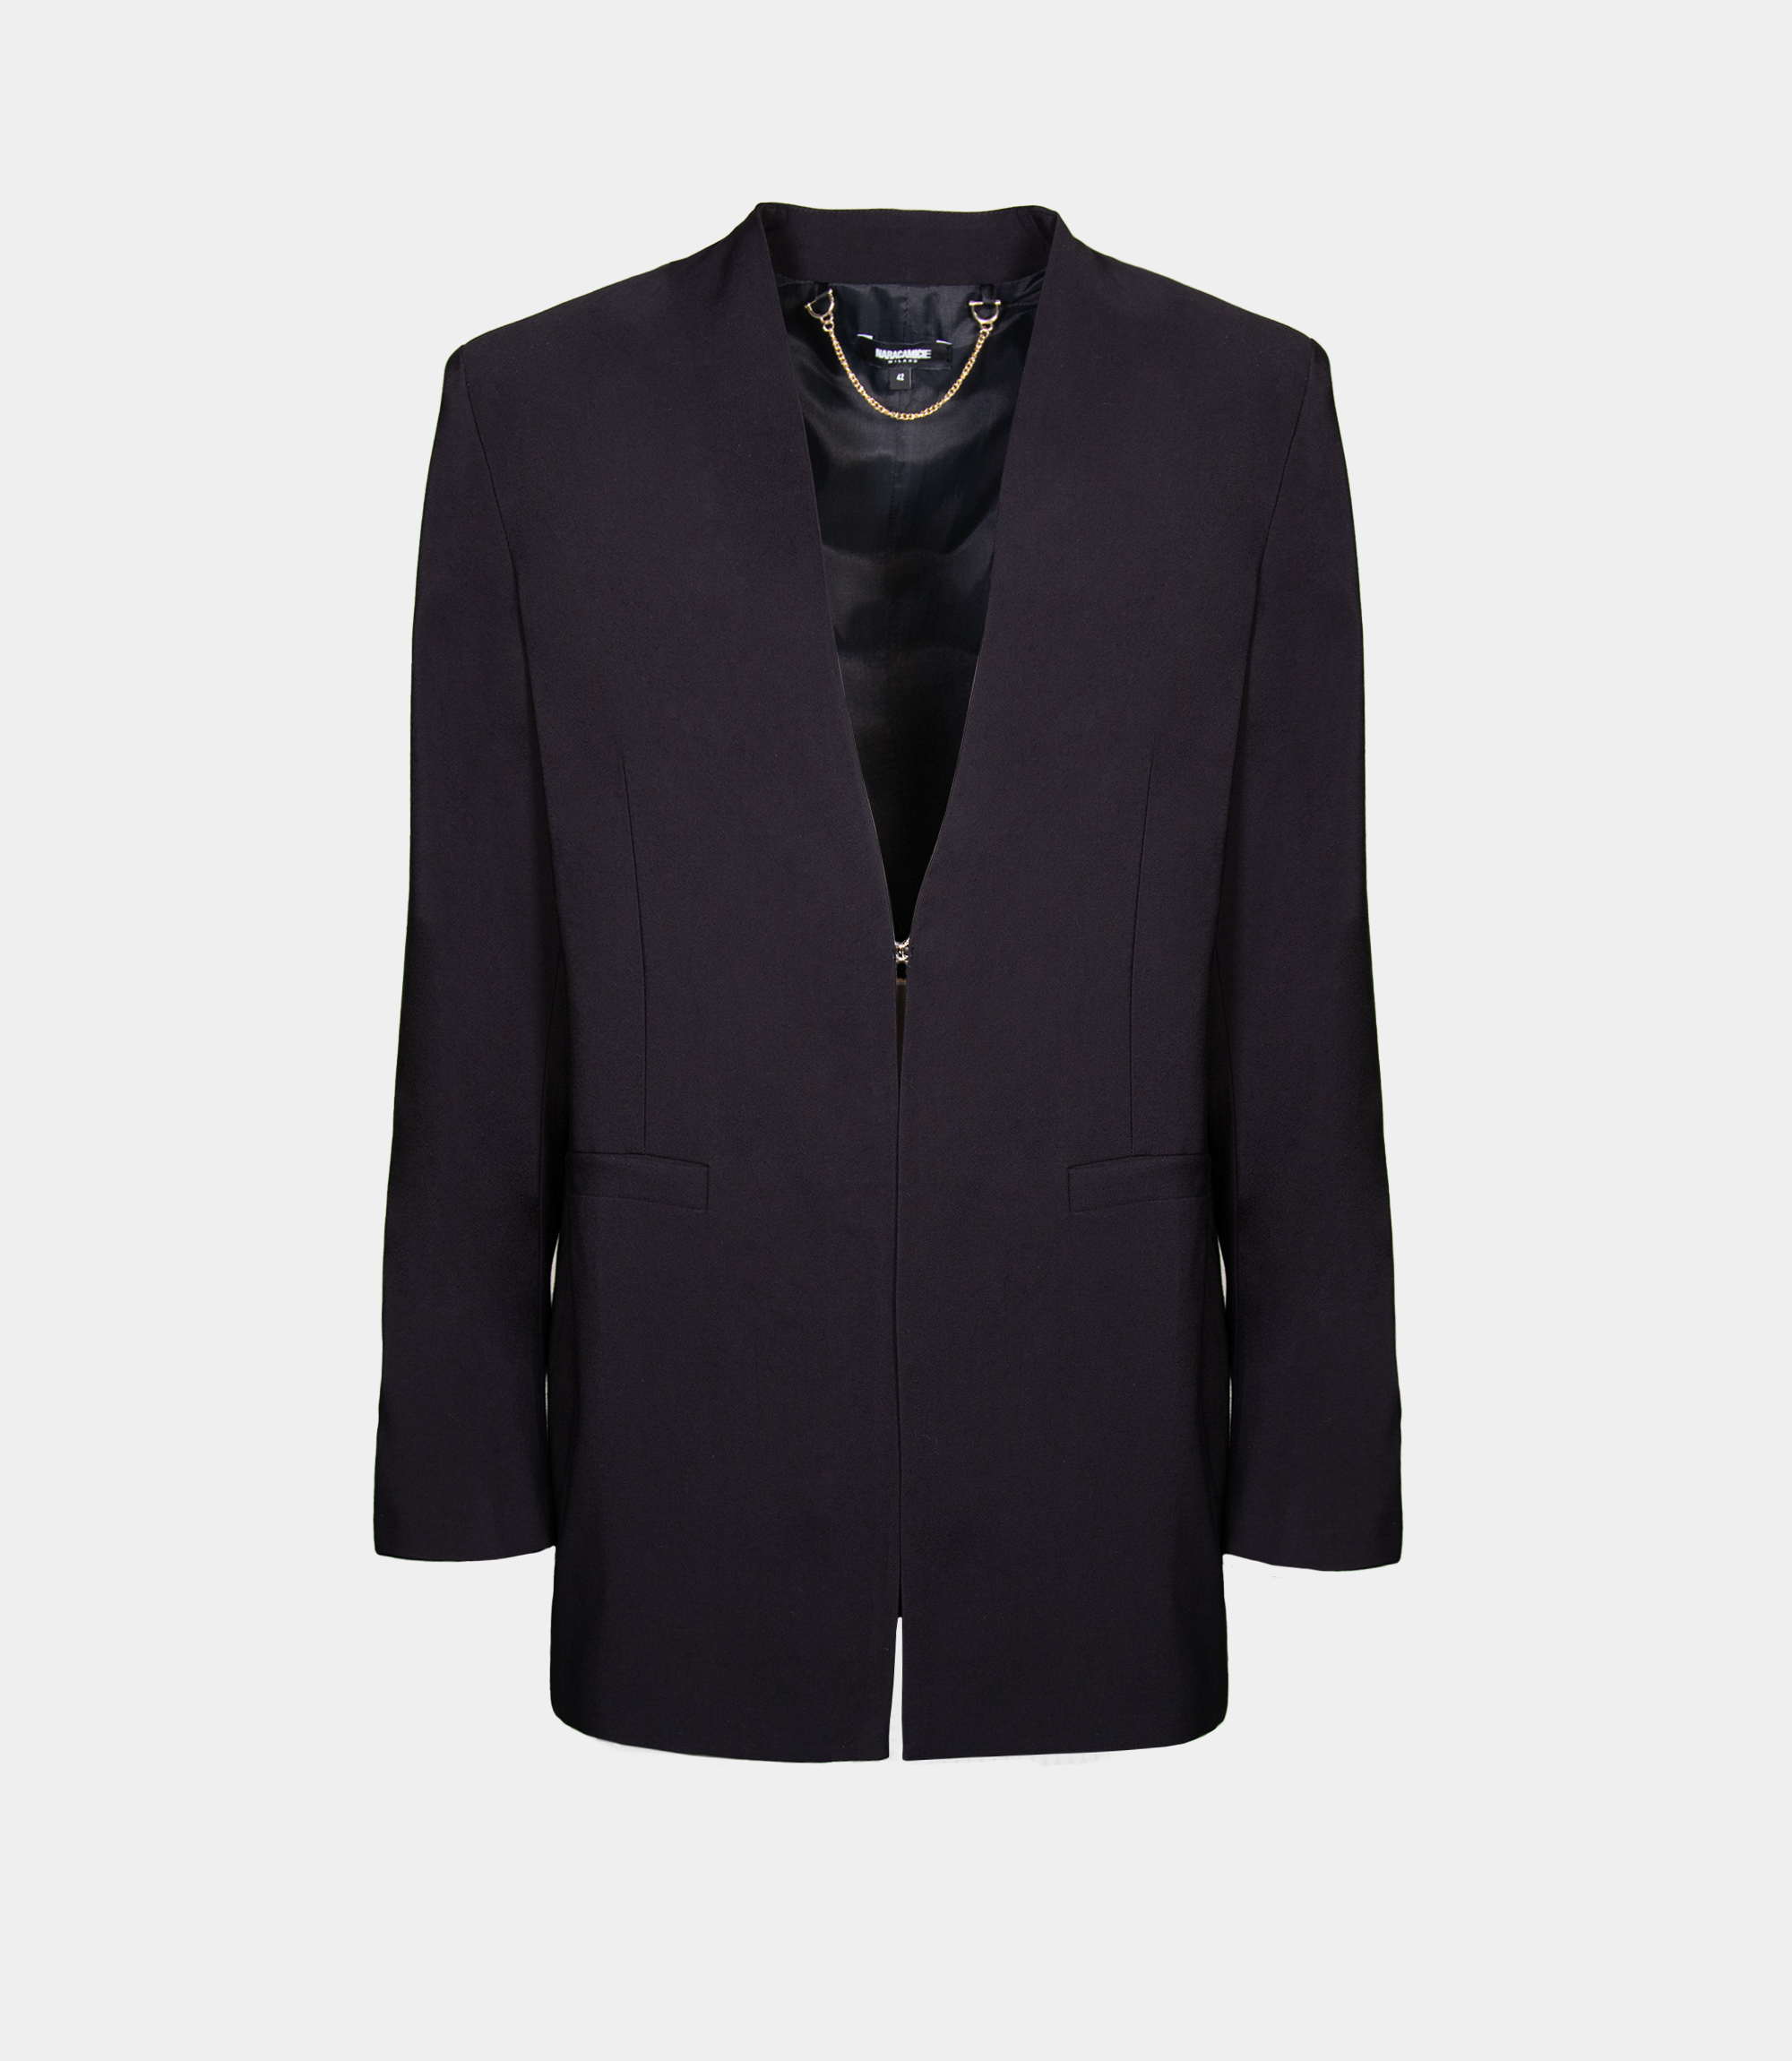 Blazer without buttons - CLOTHING - NaraMilano